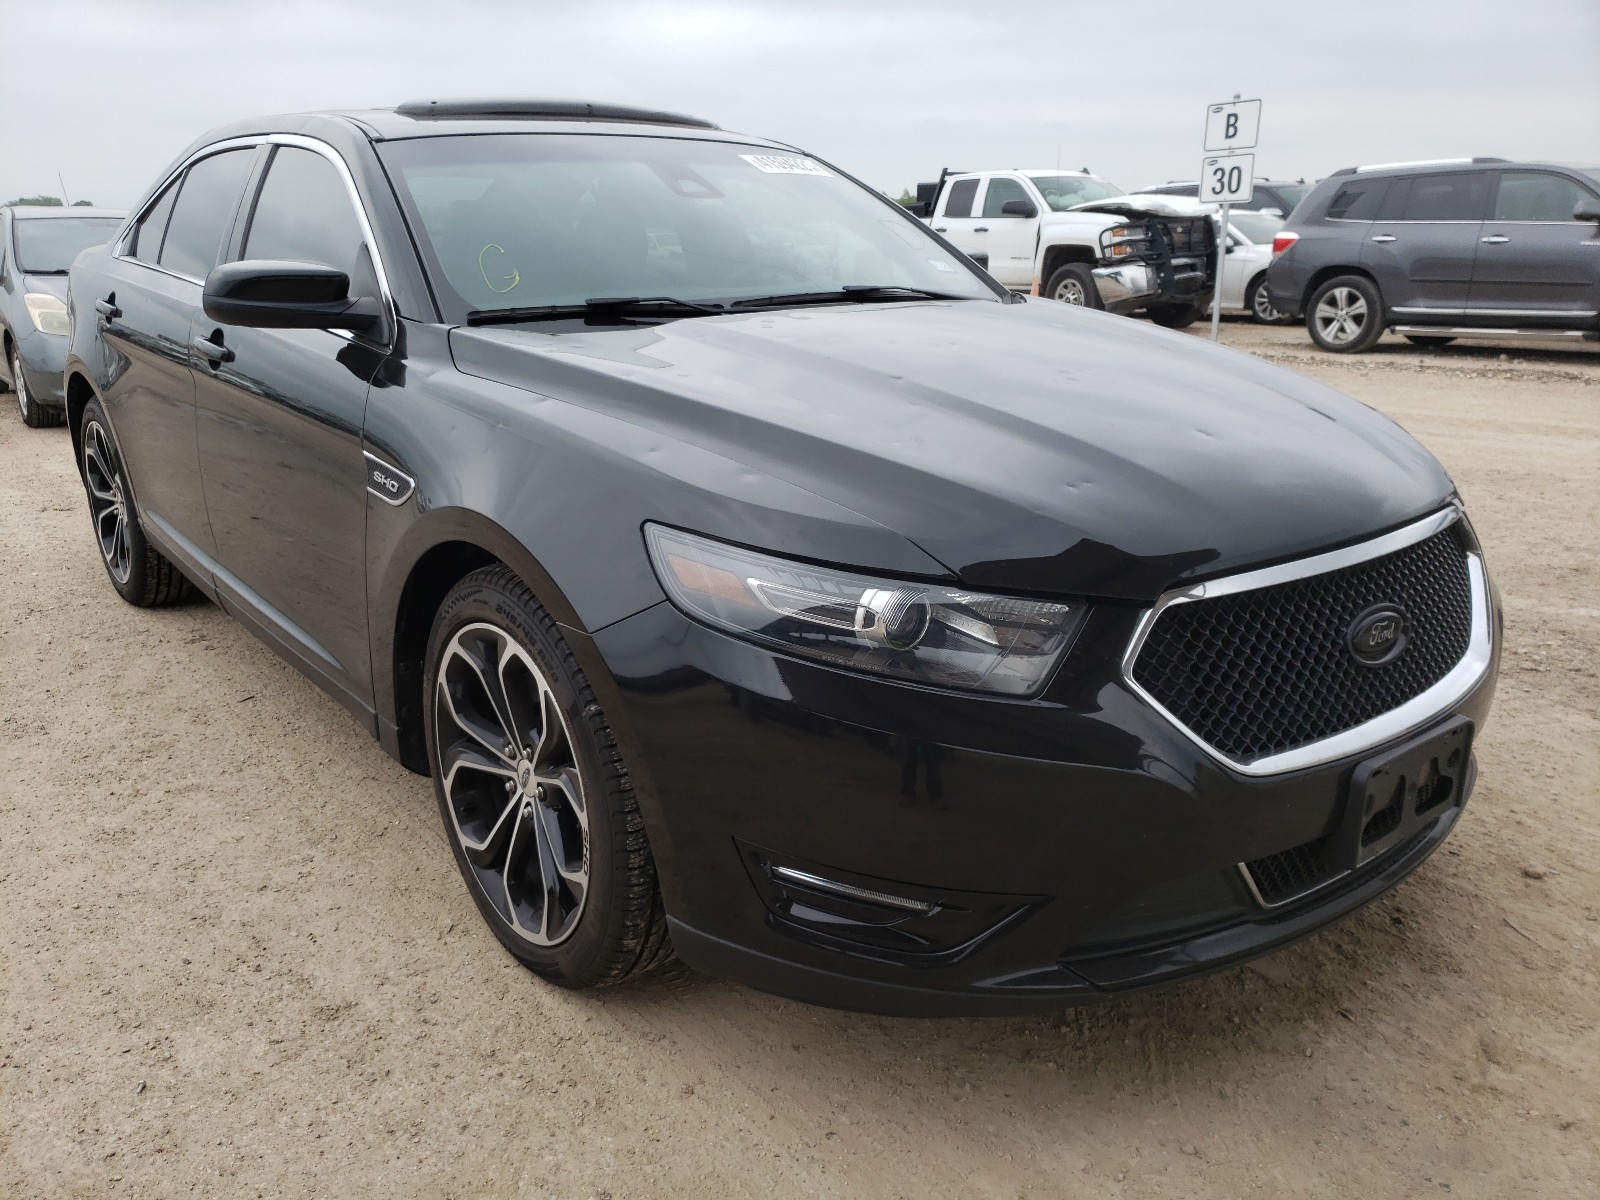 2015 Ford Taurus SHO for sale at Copart Temple TX Lot 41594 